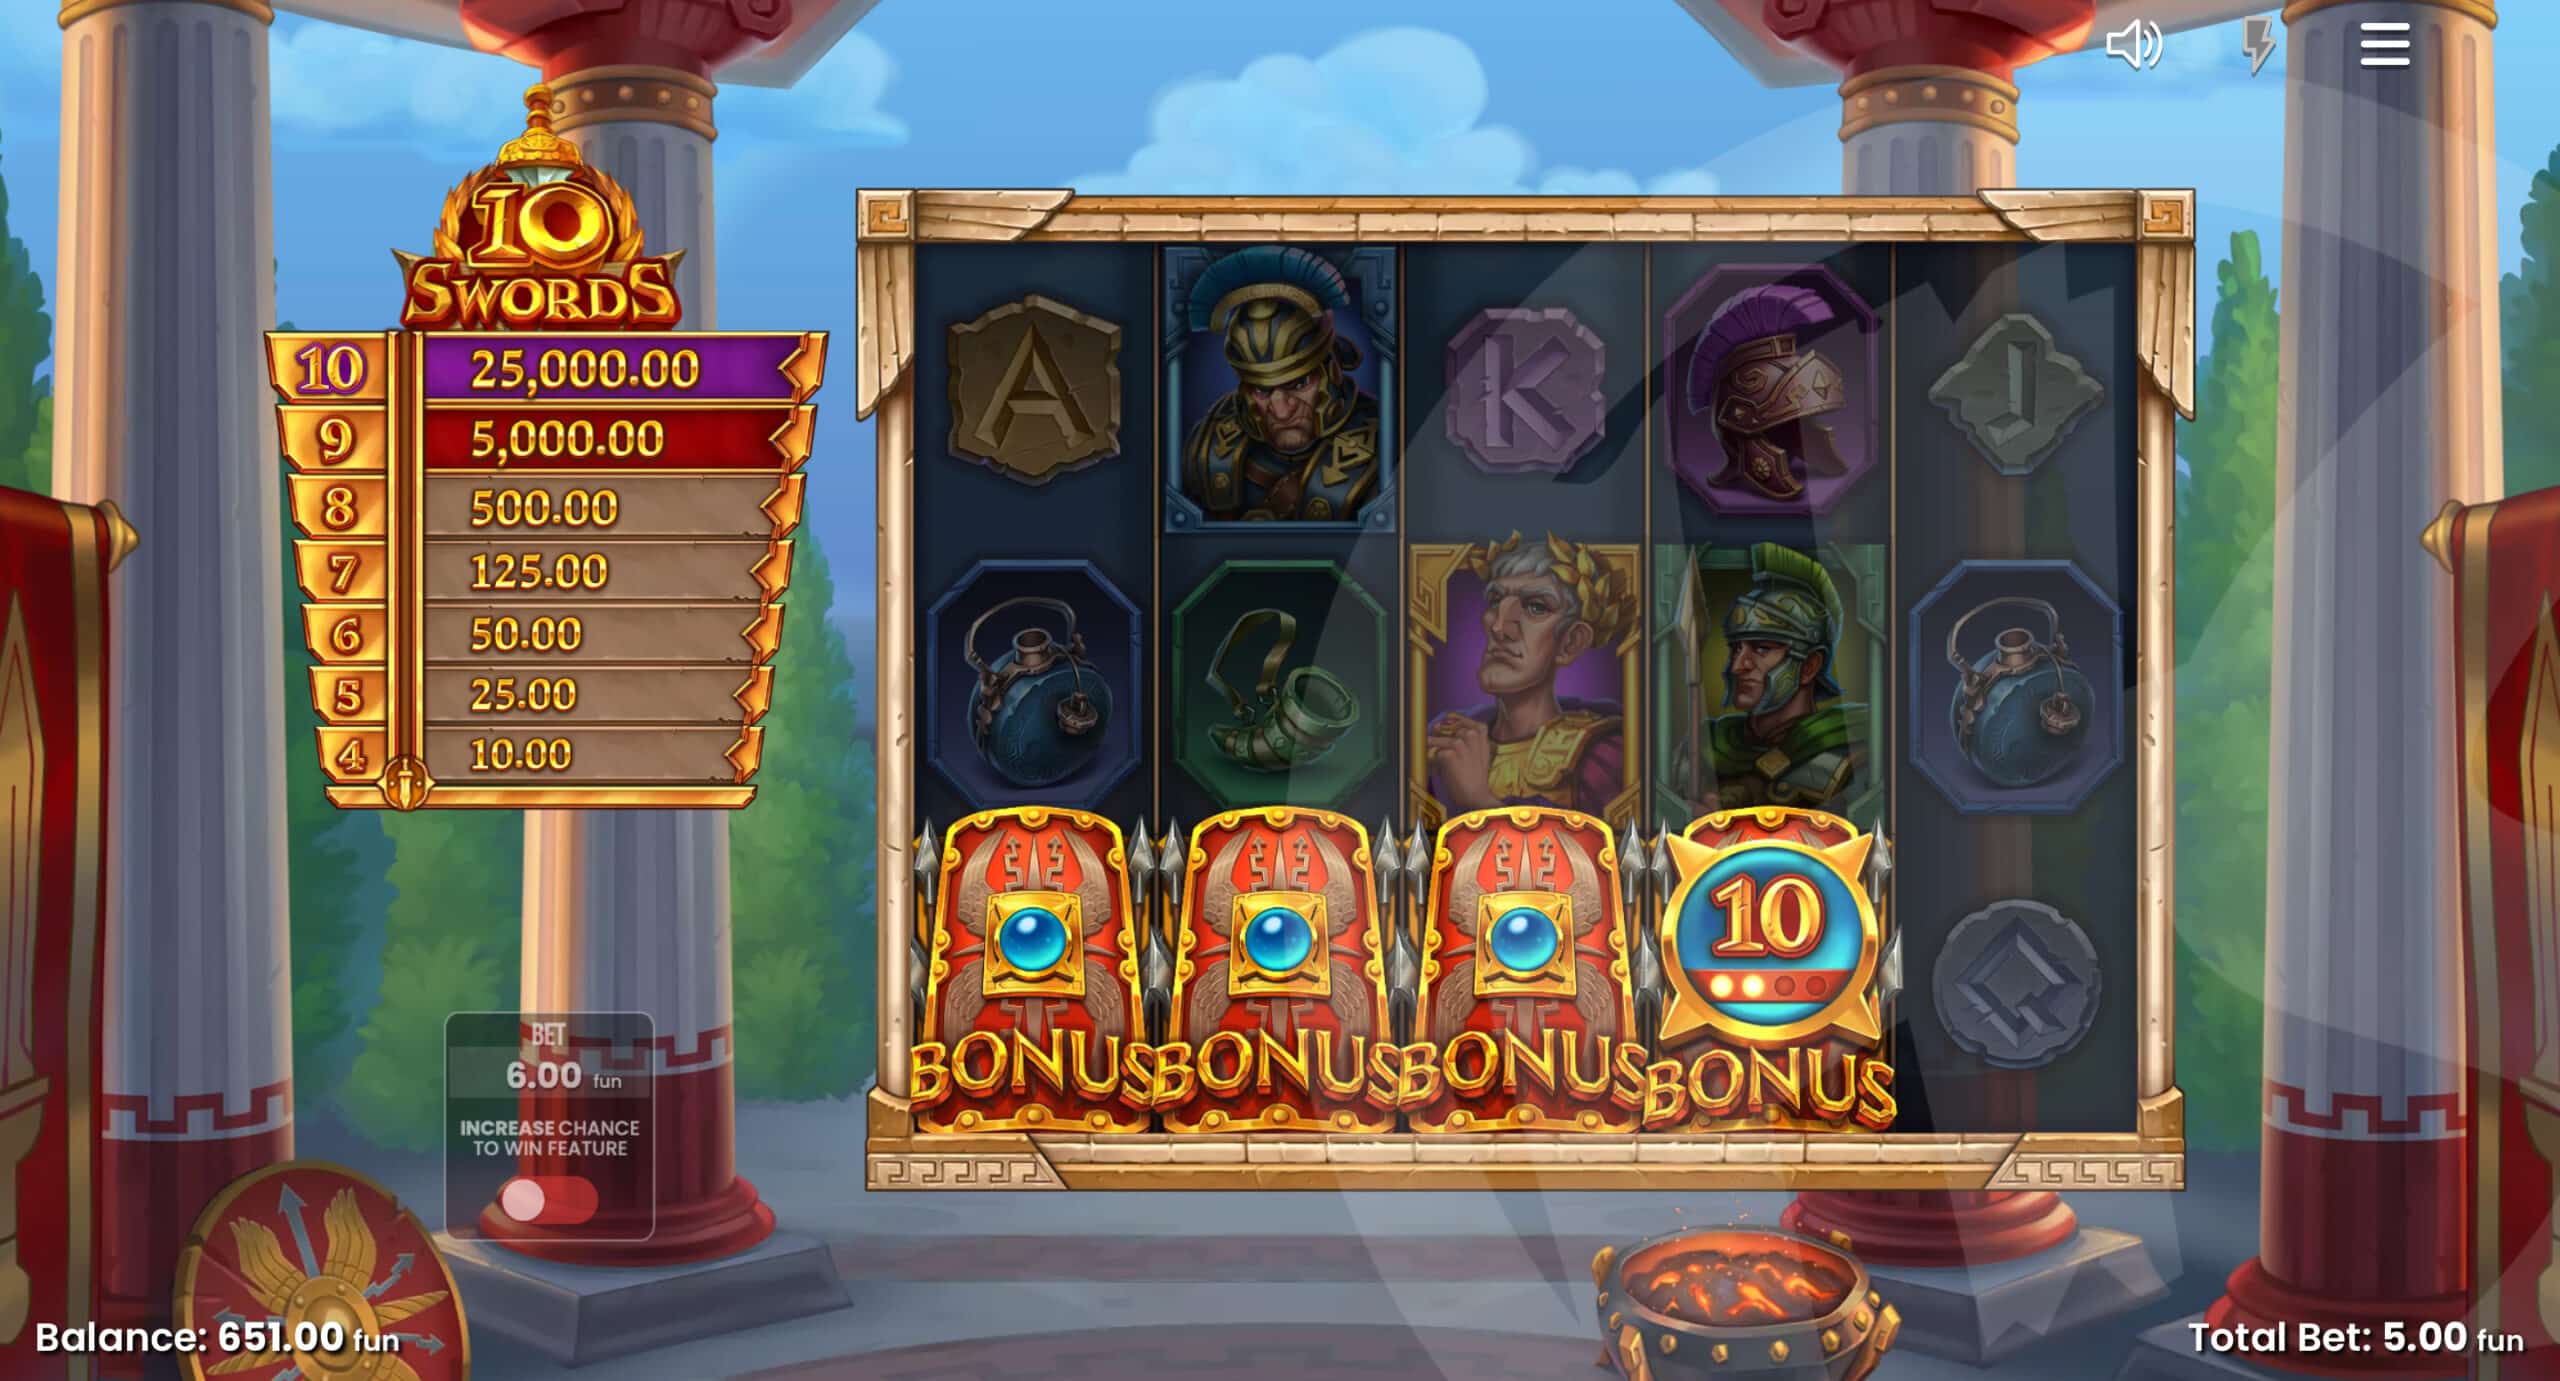 Land 3 or More Shield Symbols to Trigger Free Spins